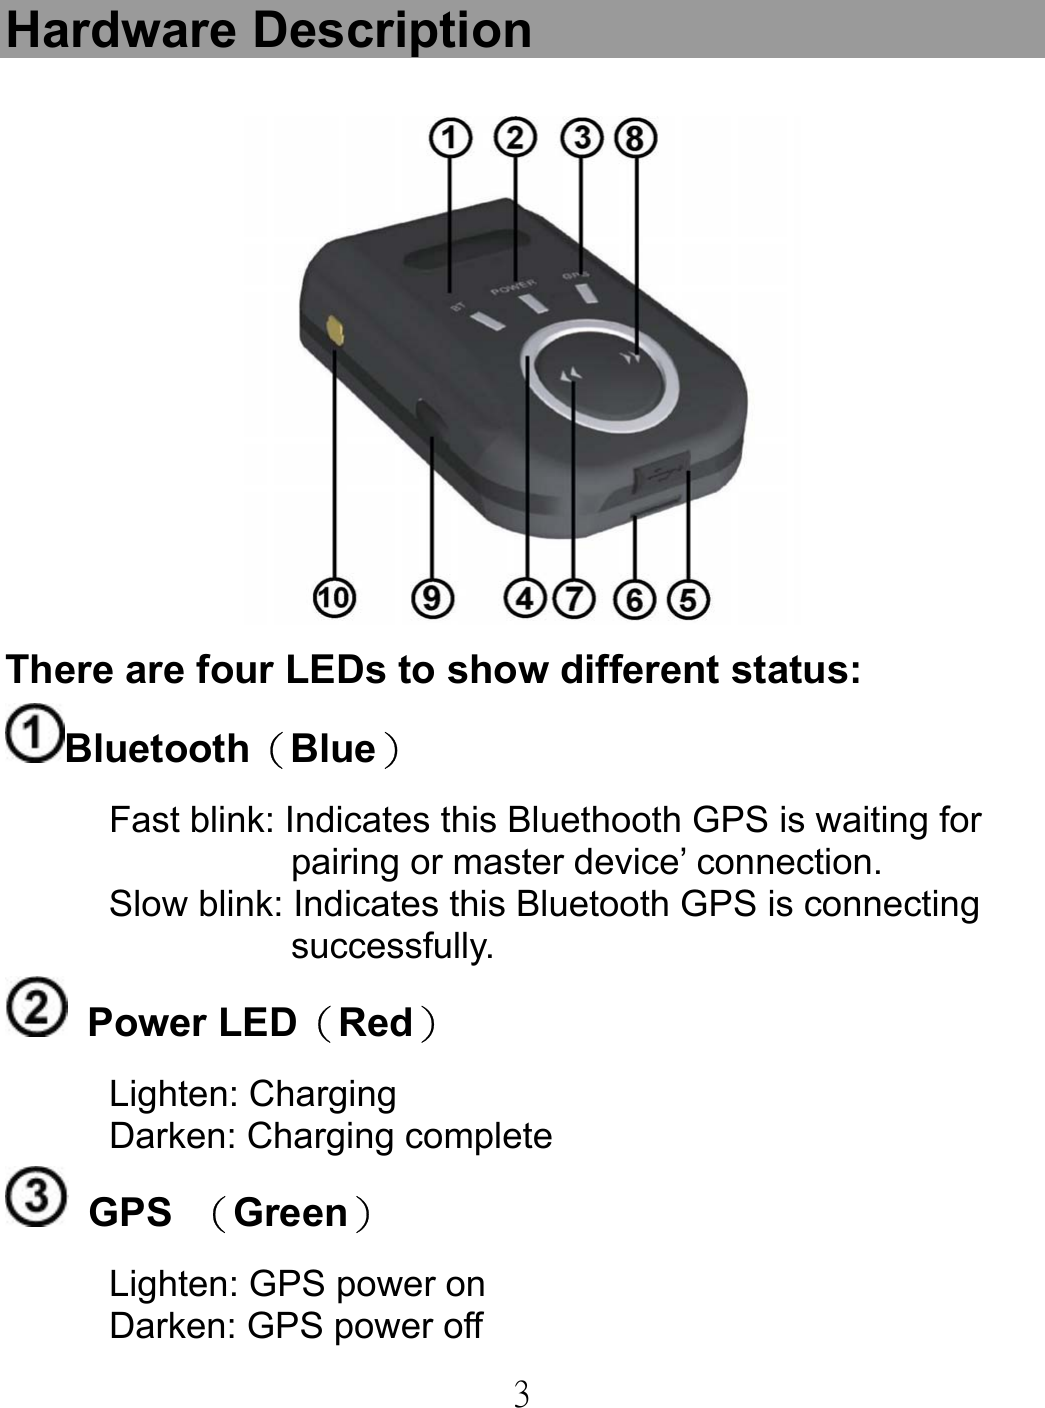  3Hardware Description   There are four LEDs to show different status: Bluetooth（Blue） Fast blink: Indicates this Bluethooth GPS is waiting for pairing or master device’ connection. Slow blink: Indicates this Bluetooth GPS is connecting successfully.    Power LED（Red） Lighten: Charging Darken: Charging complete  GPS  （Green） Lighten: GPS power on Darken: GPS power off 